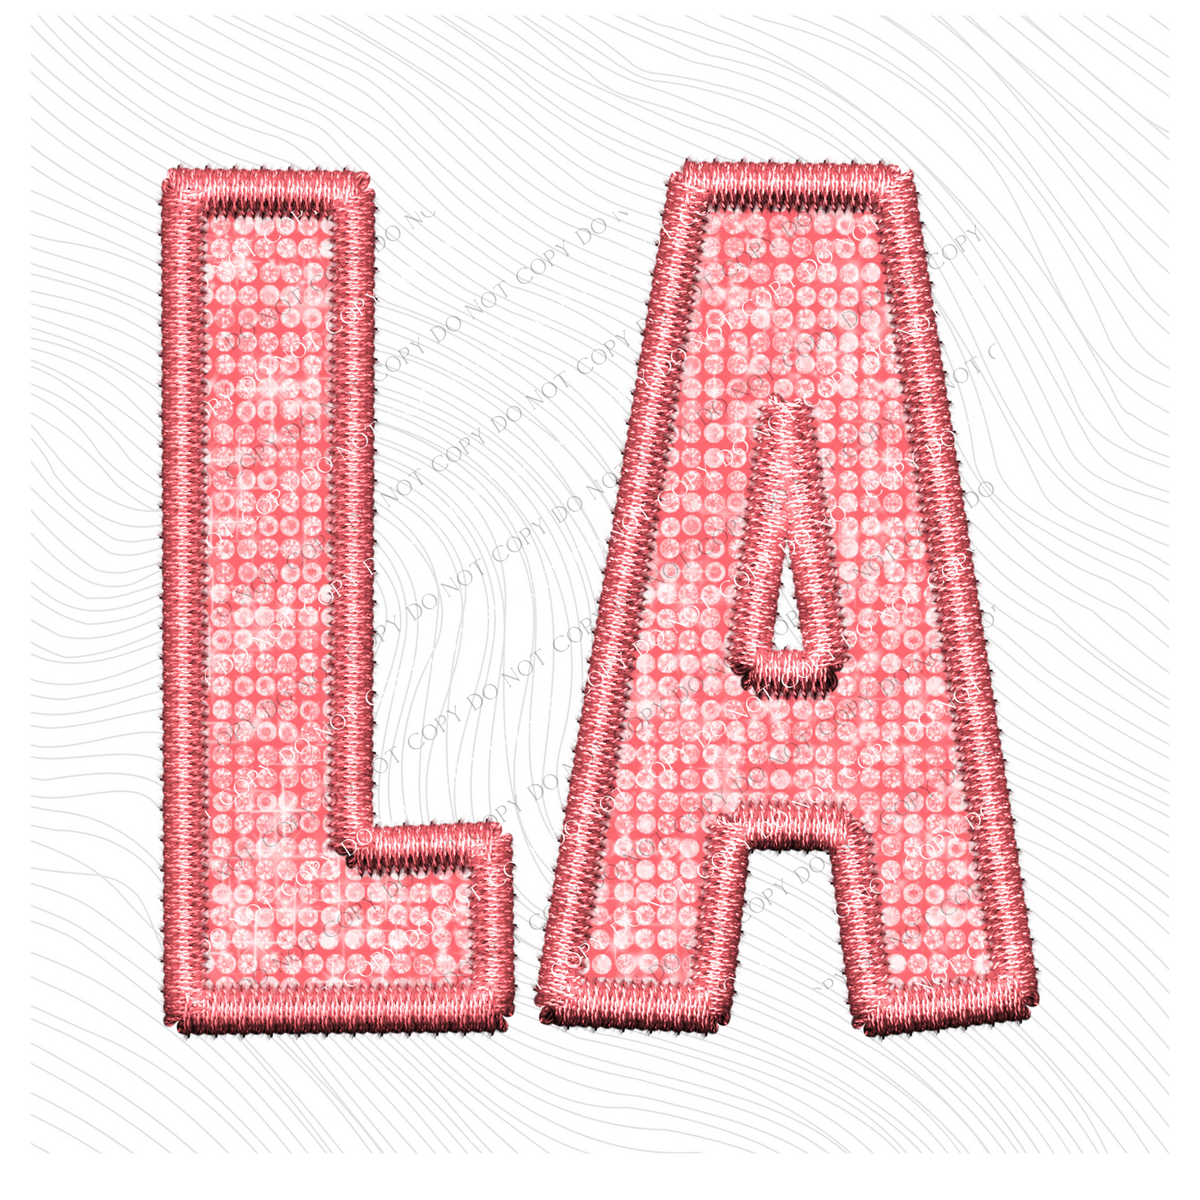 LA Louisiana Faux Embroidery Diamonds Bling in Sunset Coral Digital Design, PNG